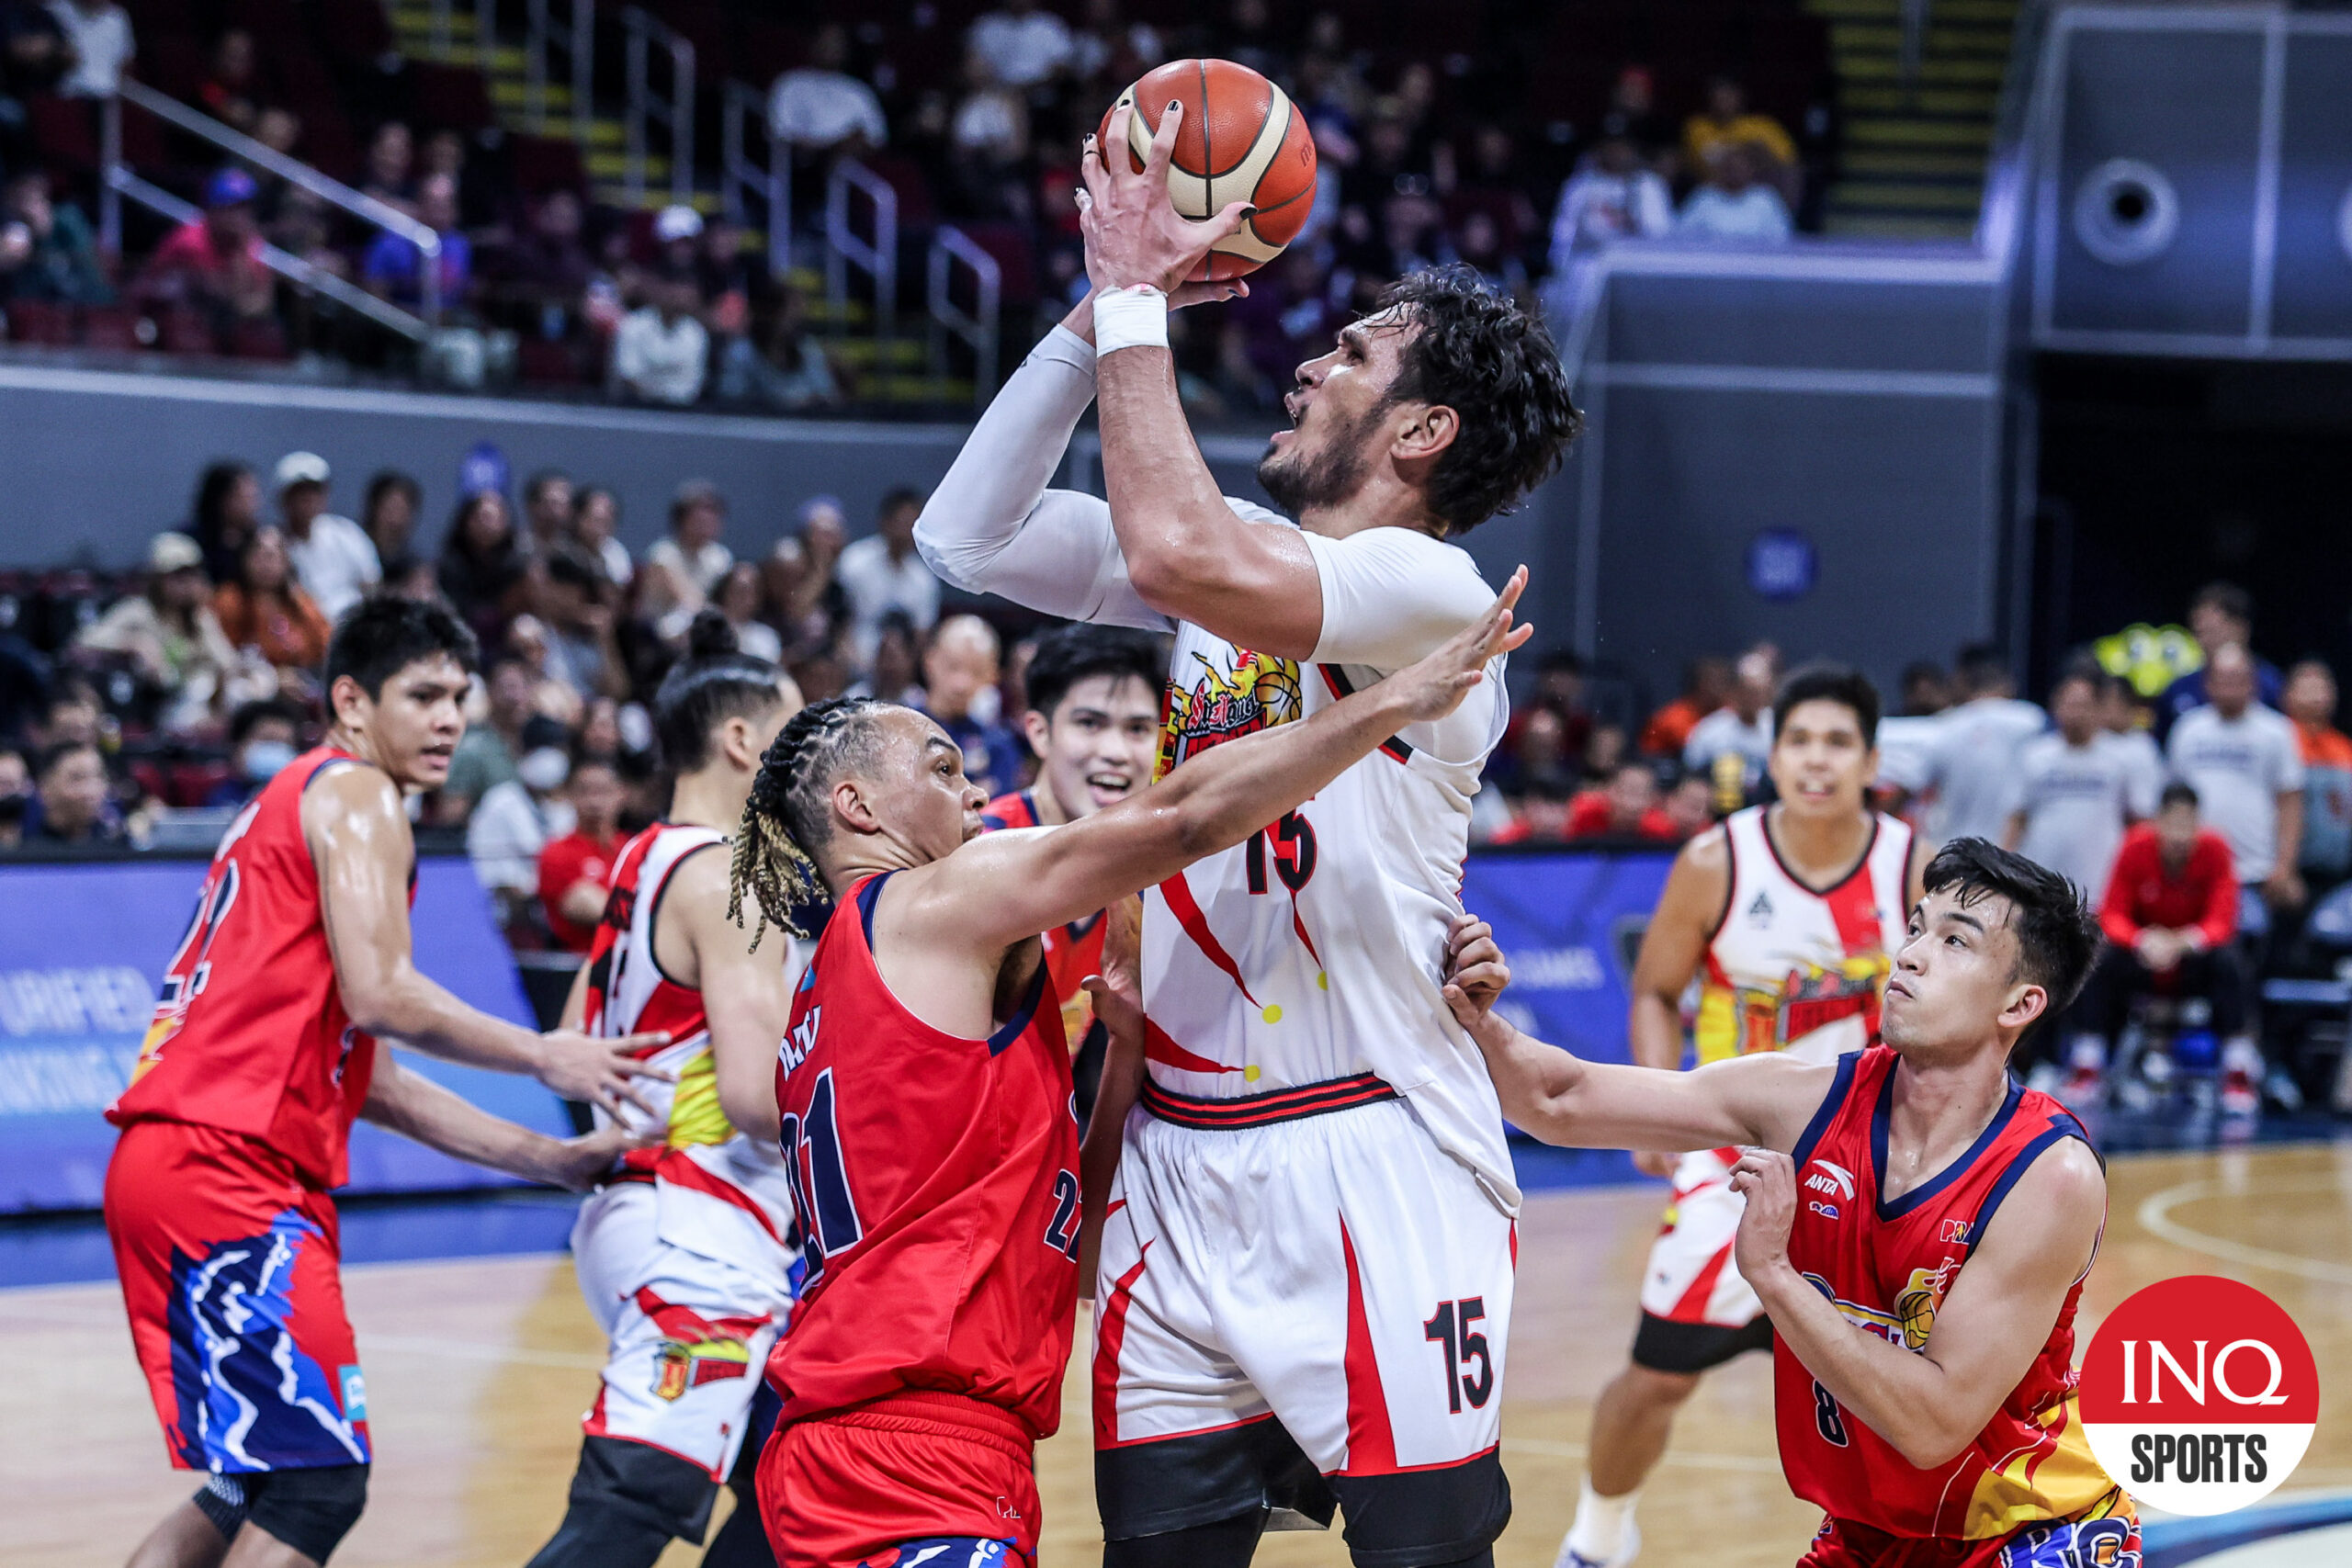 June Mar Fajardo leads San Miguel past Rain or Shine for a 1-0 lead in the PBA Philippine Cup semifinals.